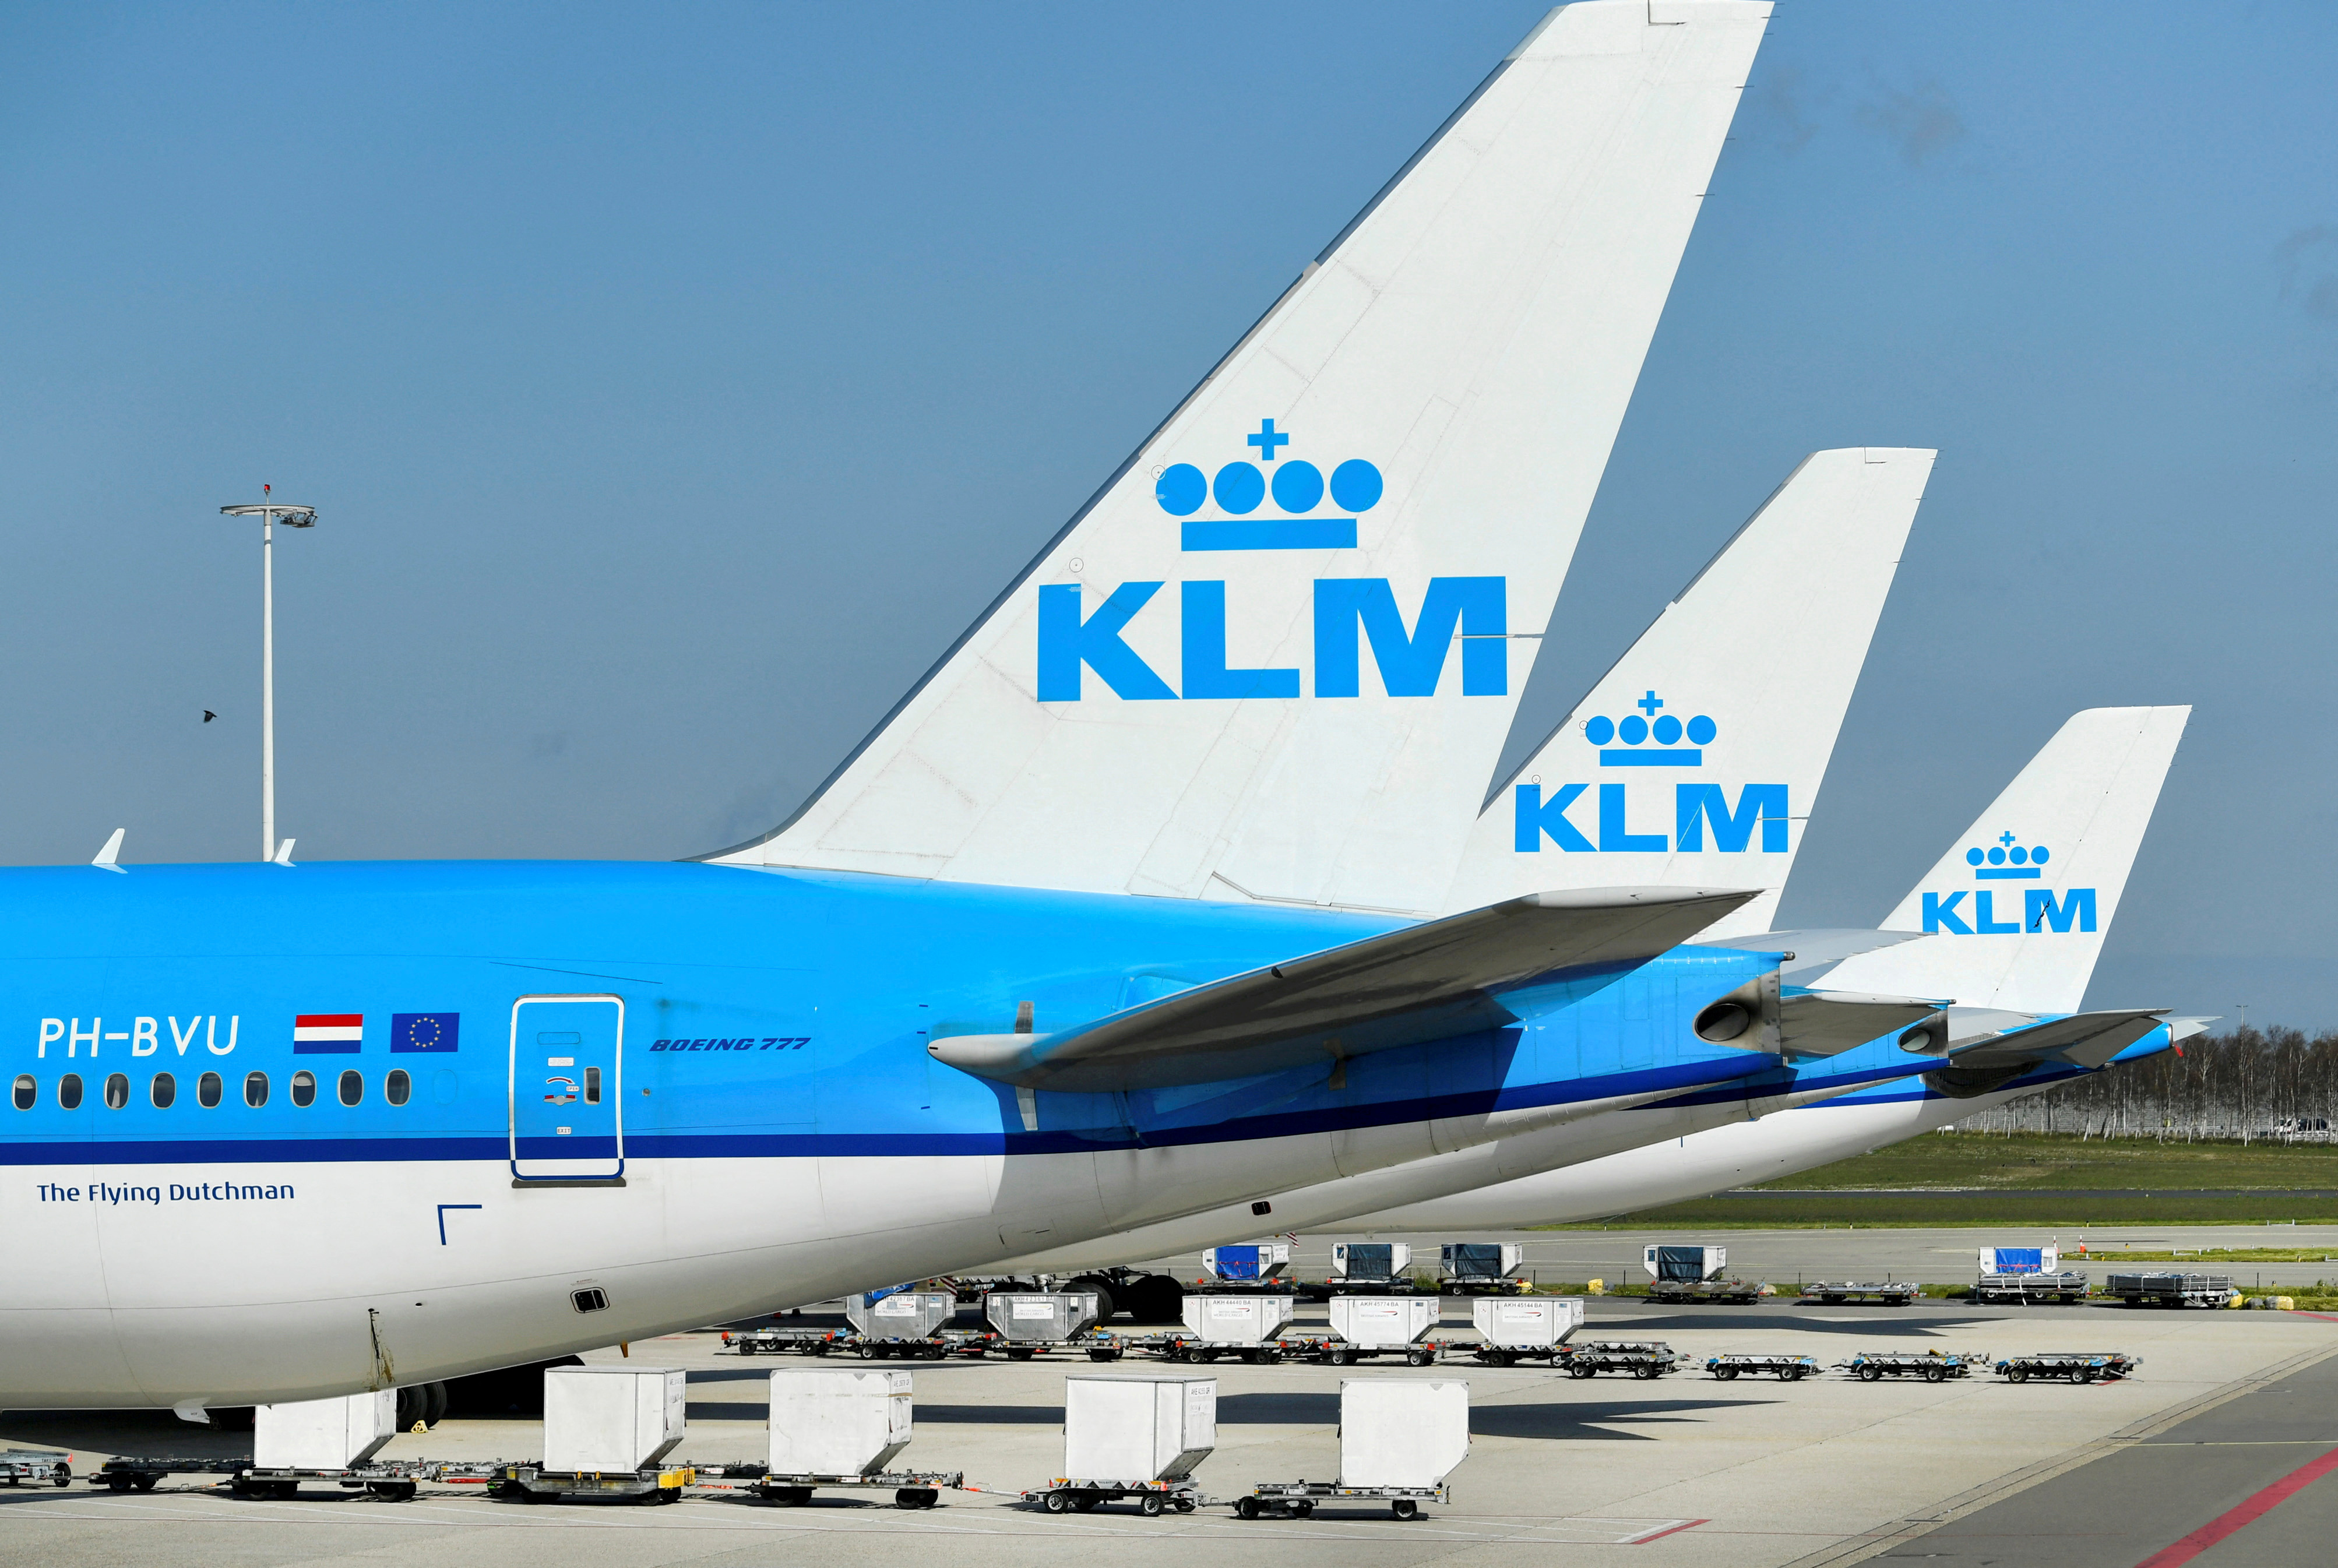 KLM airplanes are seen parked at Schiphol Airport in Amsterdam